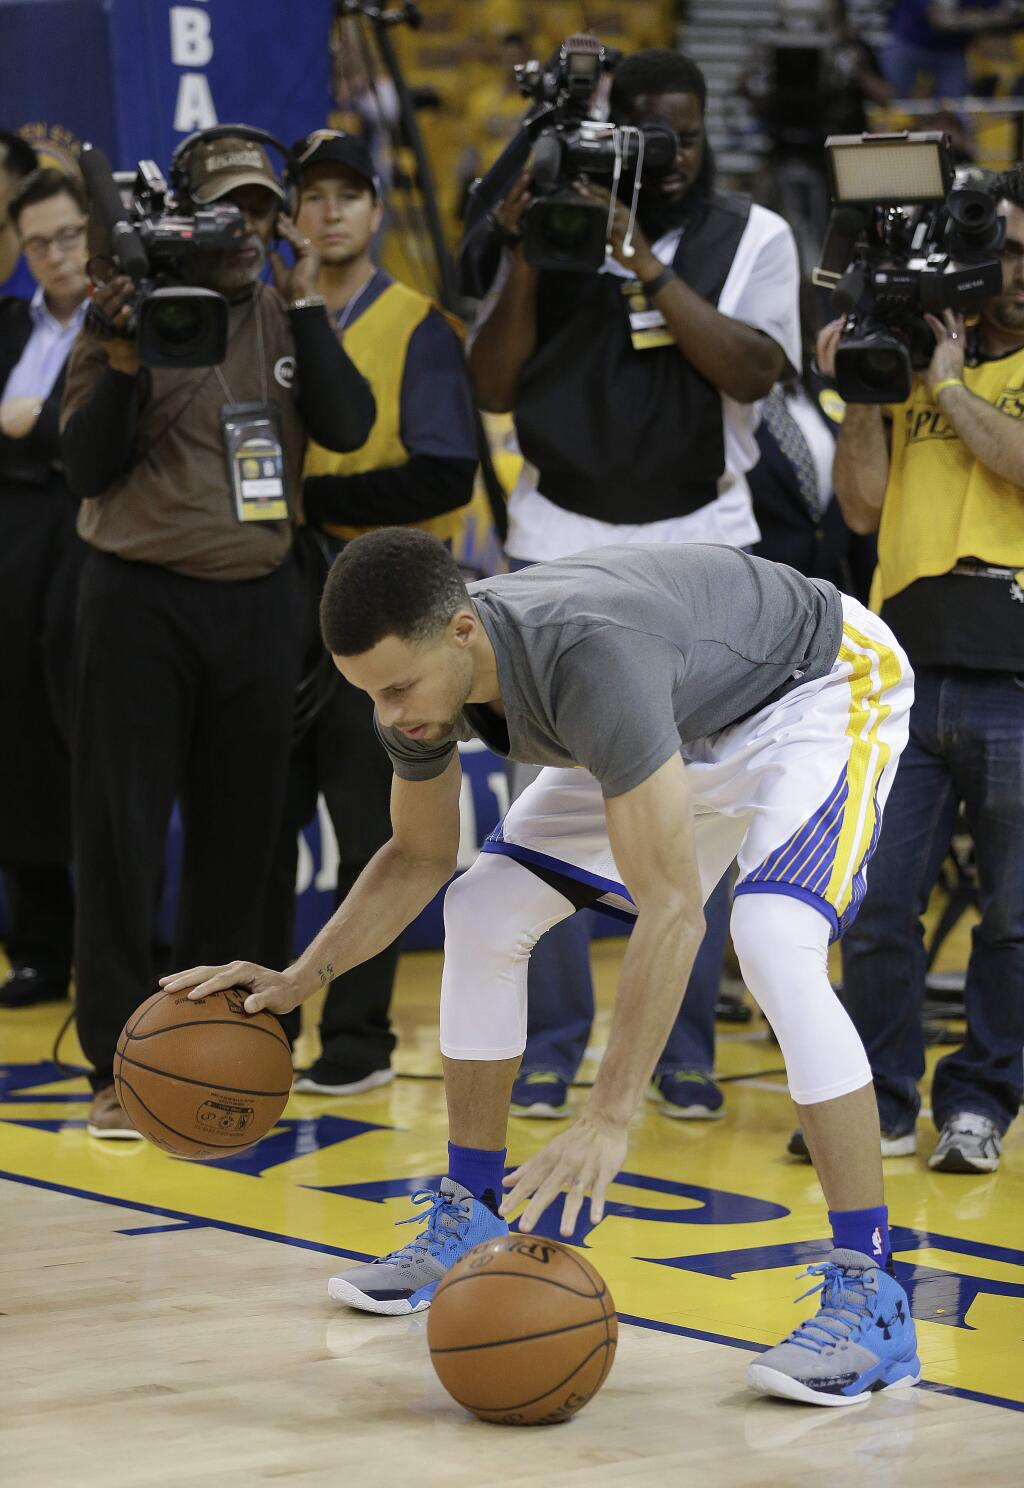 Golden State Warriors' Stephen Curry practices prior to Game 2 against the Houston Rockets on Monday, April 18, 2016, in Oakland. (AP Photo/Ben Margot)